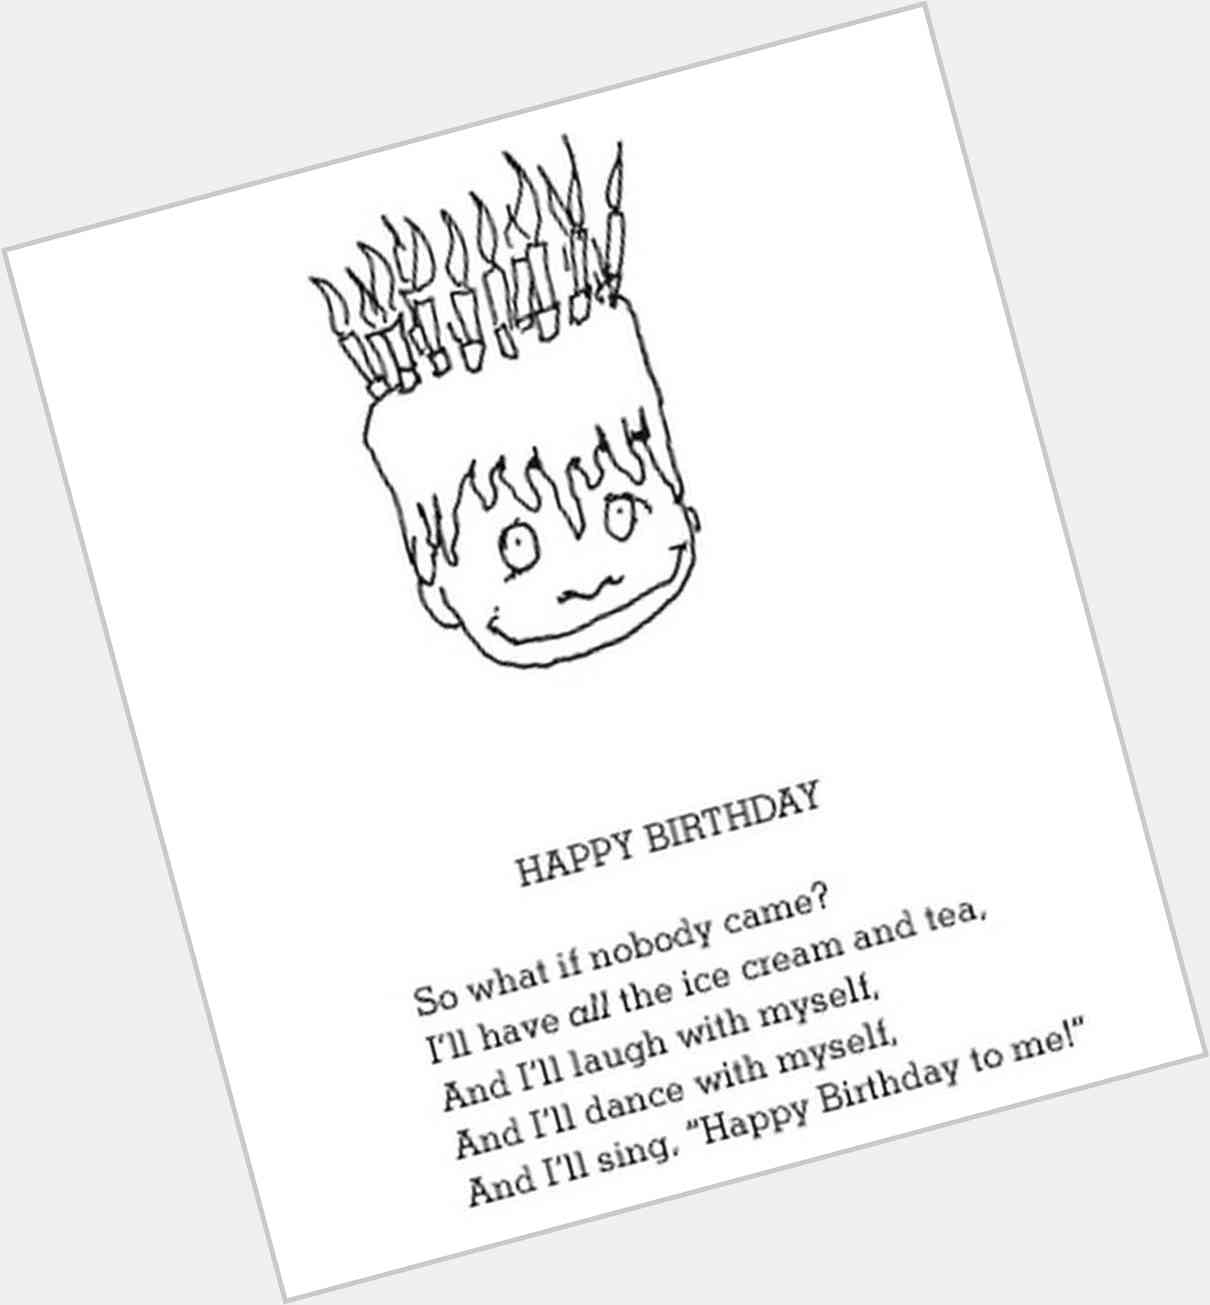 Also happy birthday to the late great Shel Silverstein!    